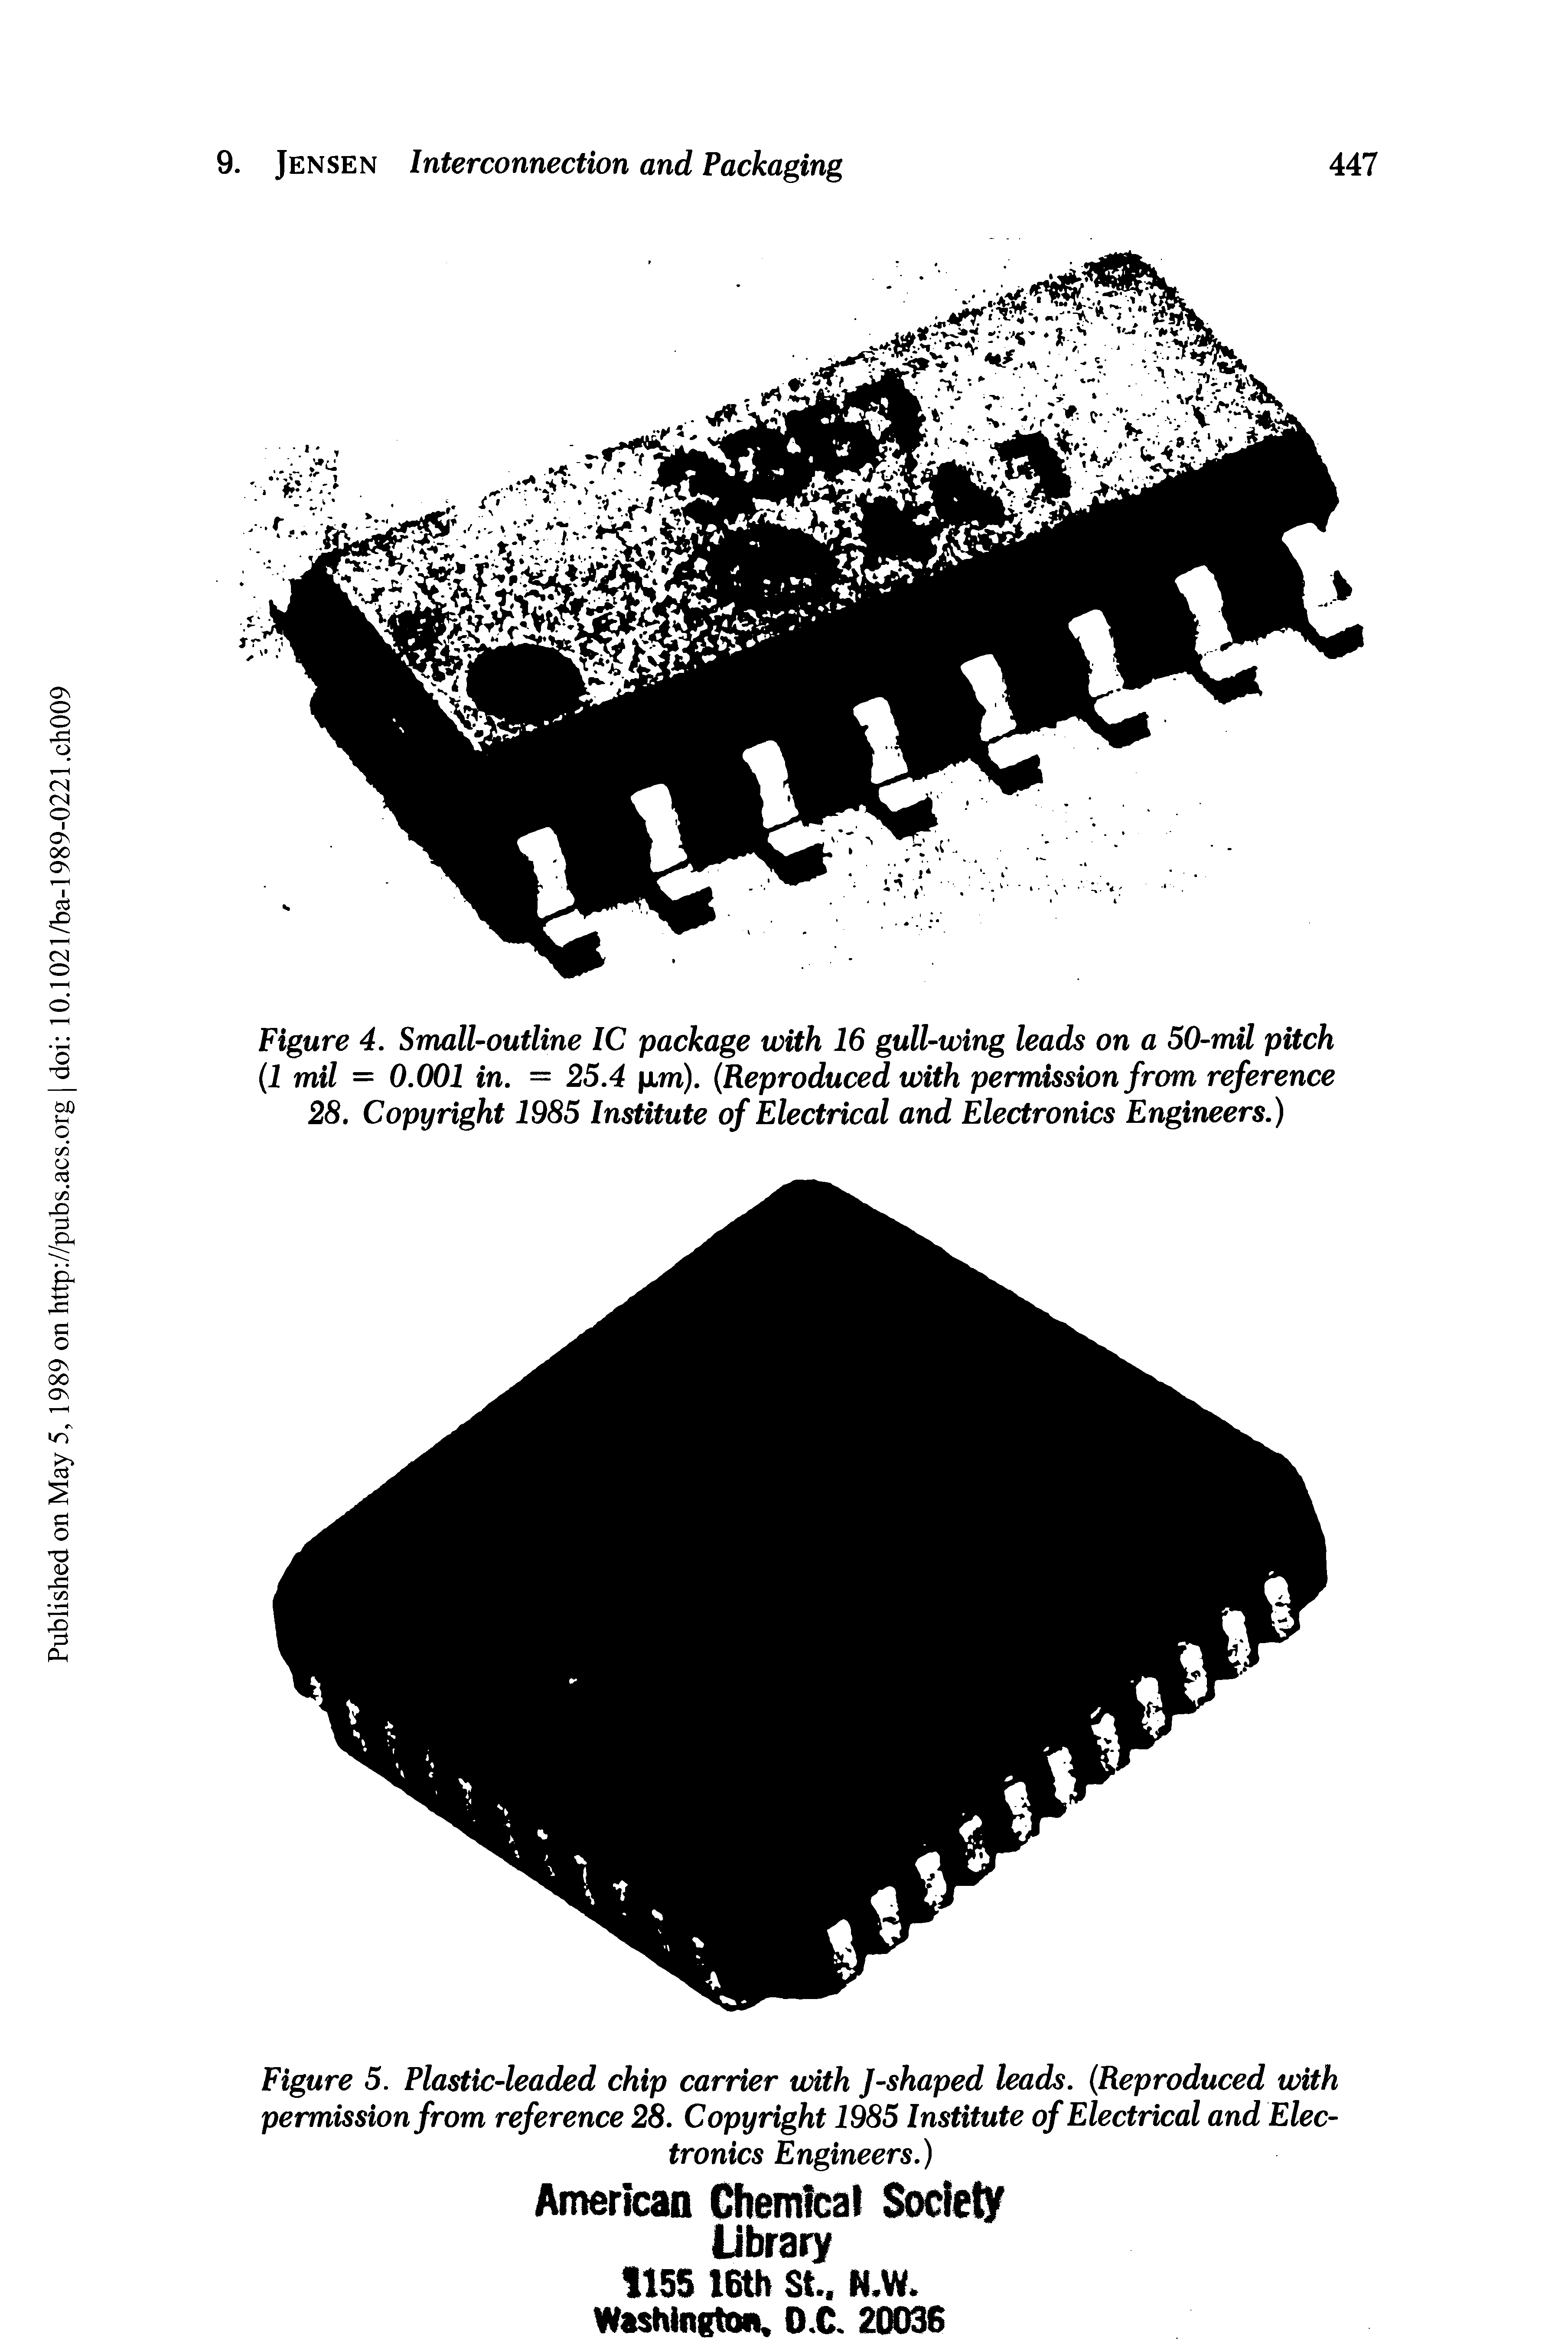 Figure 4. Small-outline IC package with 16 gull-wing leads on a 50-mil pitch (1 mil = 0.001 in. = 25.4 im). (Reproduced with permission from reference 28. Copyright 1985 Institute of Electrical and Electronics Engineers.)...